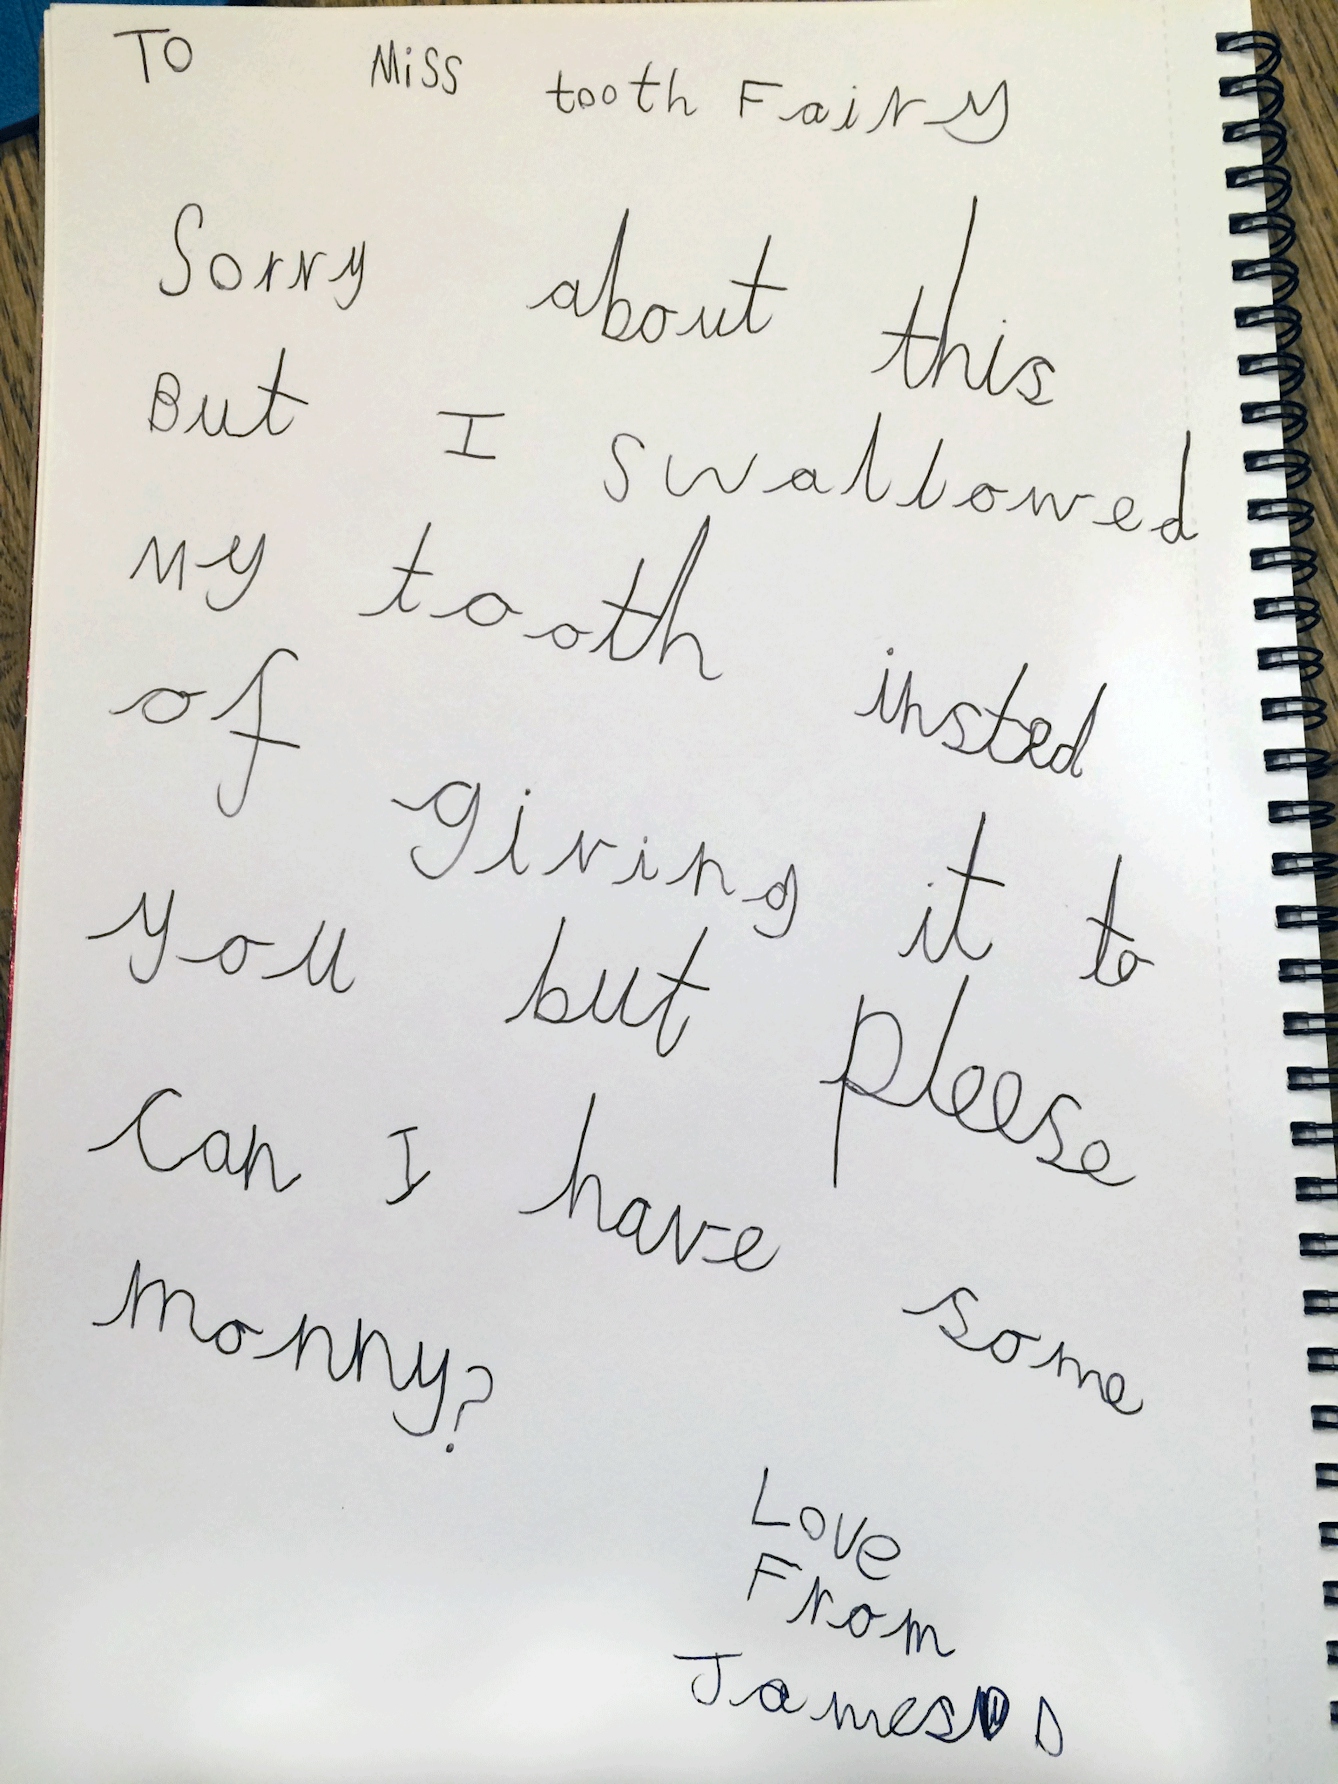 Letter written on white paper in a spiral-bound notebook. Reads: To Miss Tooth Fairy, sorry about this, but I swallowed my tooth instead of giving it to you, but please can I have some money? Love from James D